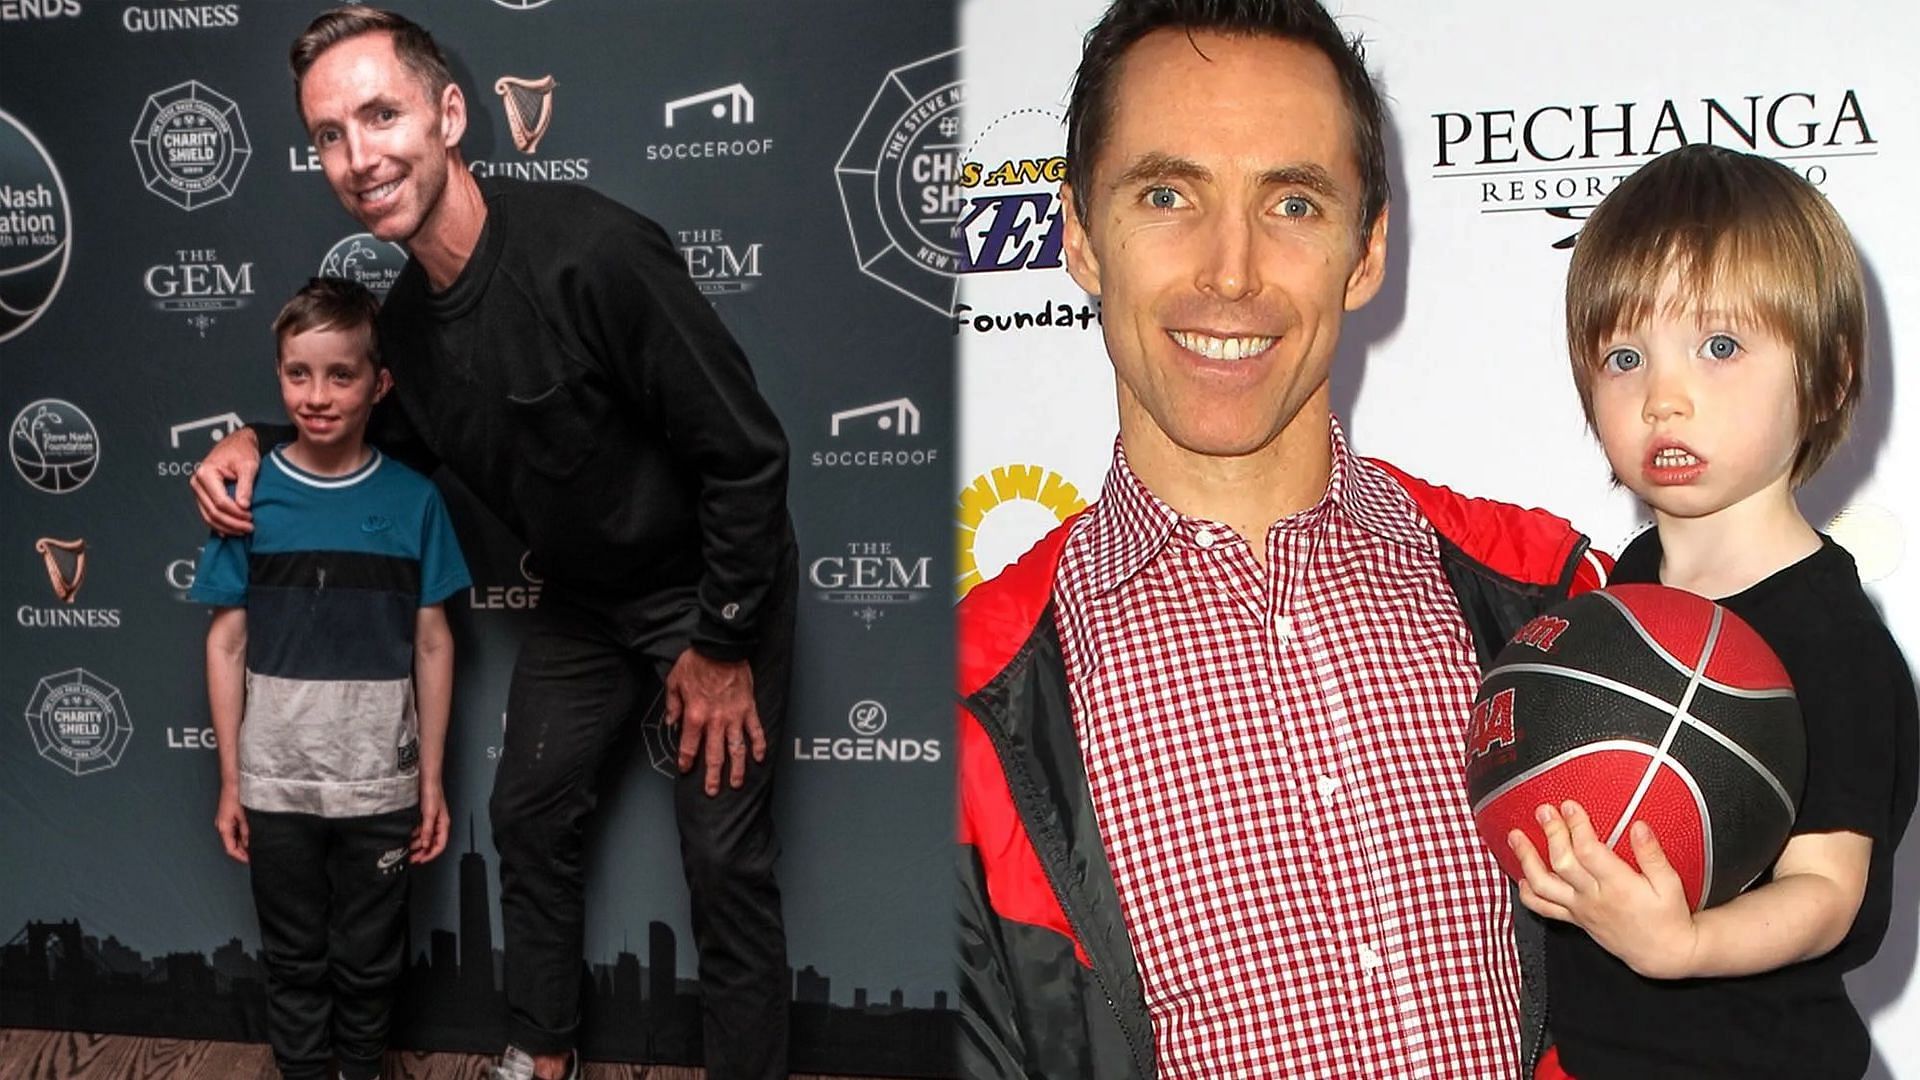 Steve Nash with his son Matteo, who was born in November 2010